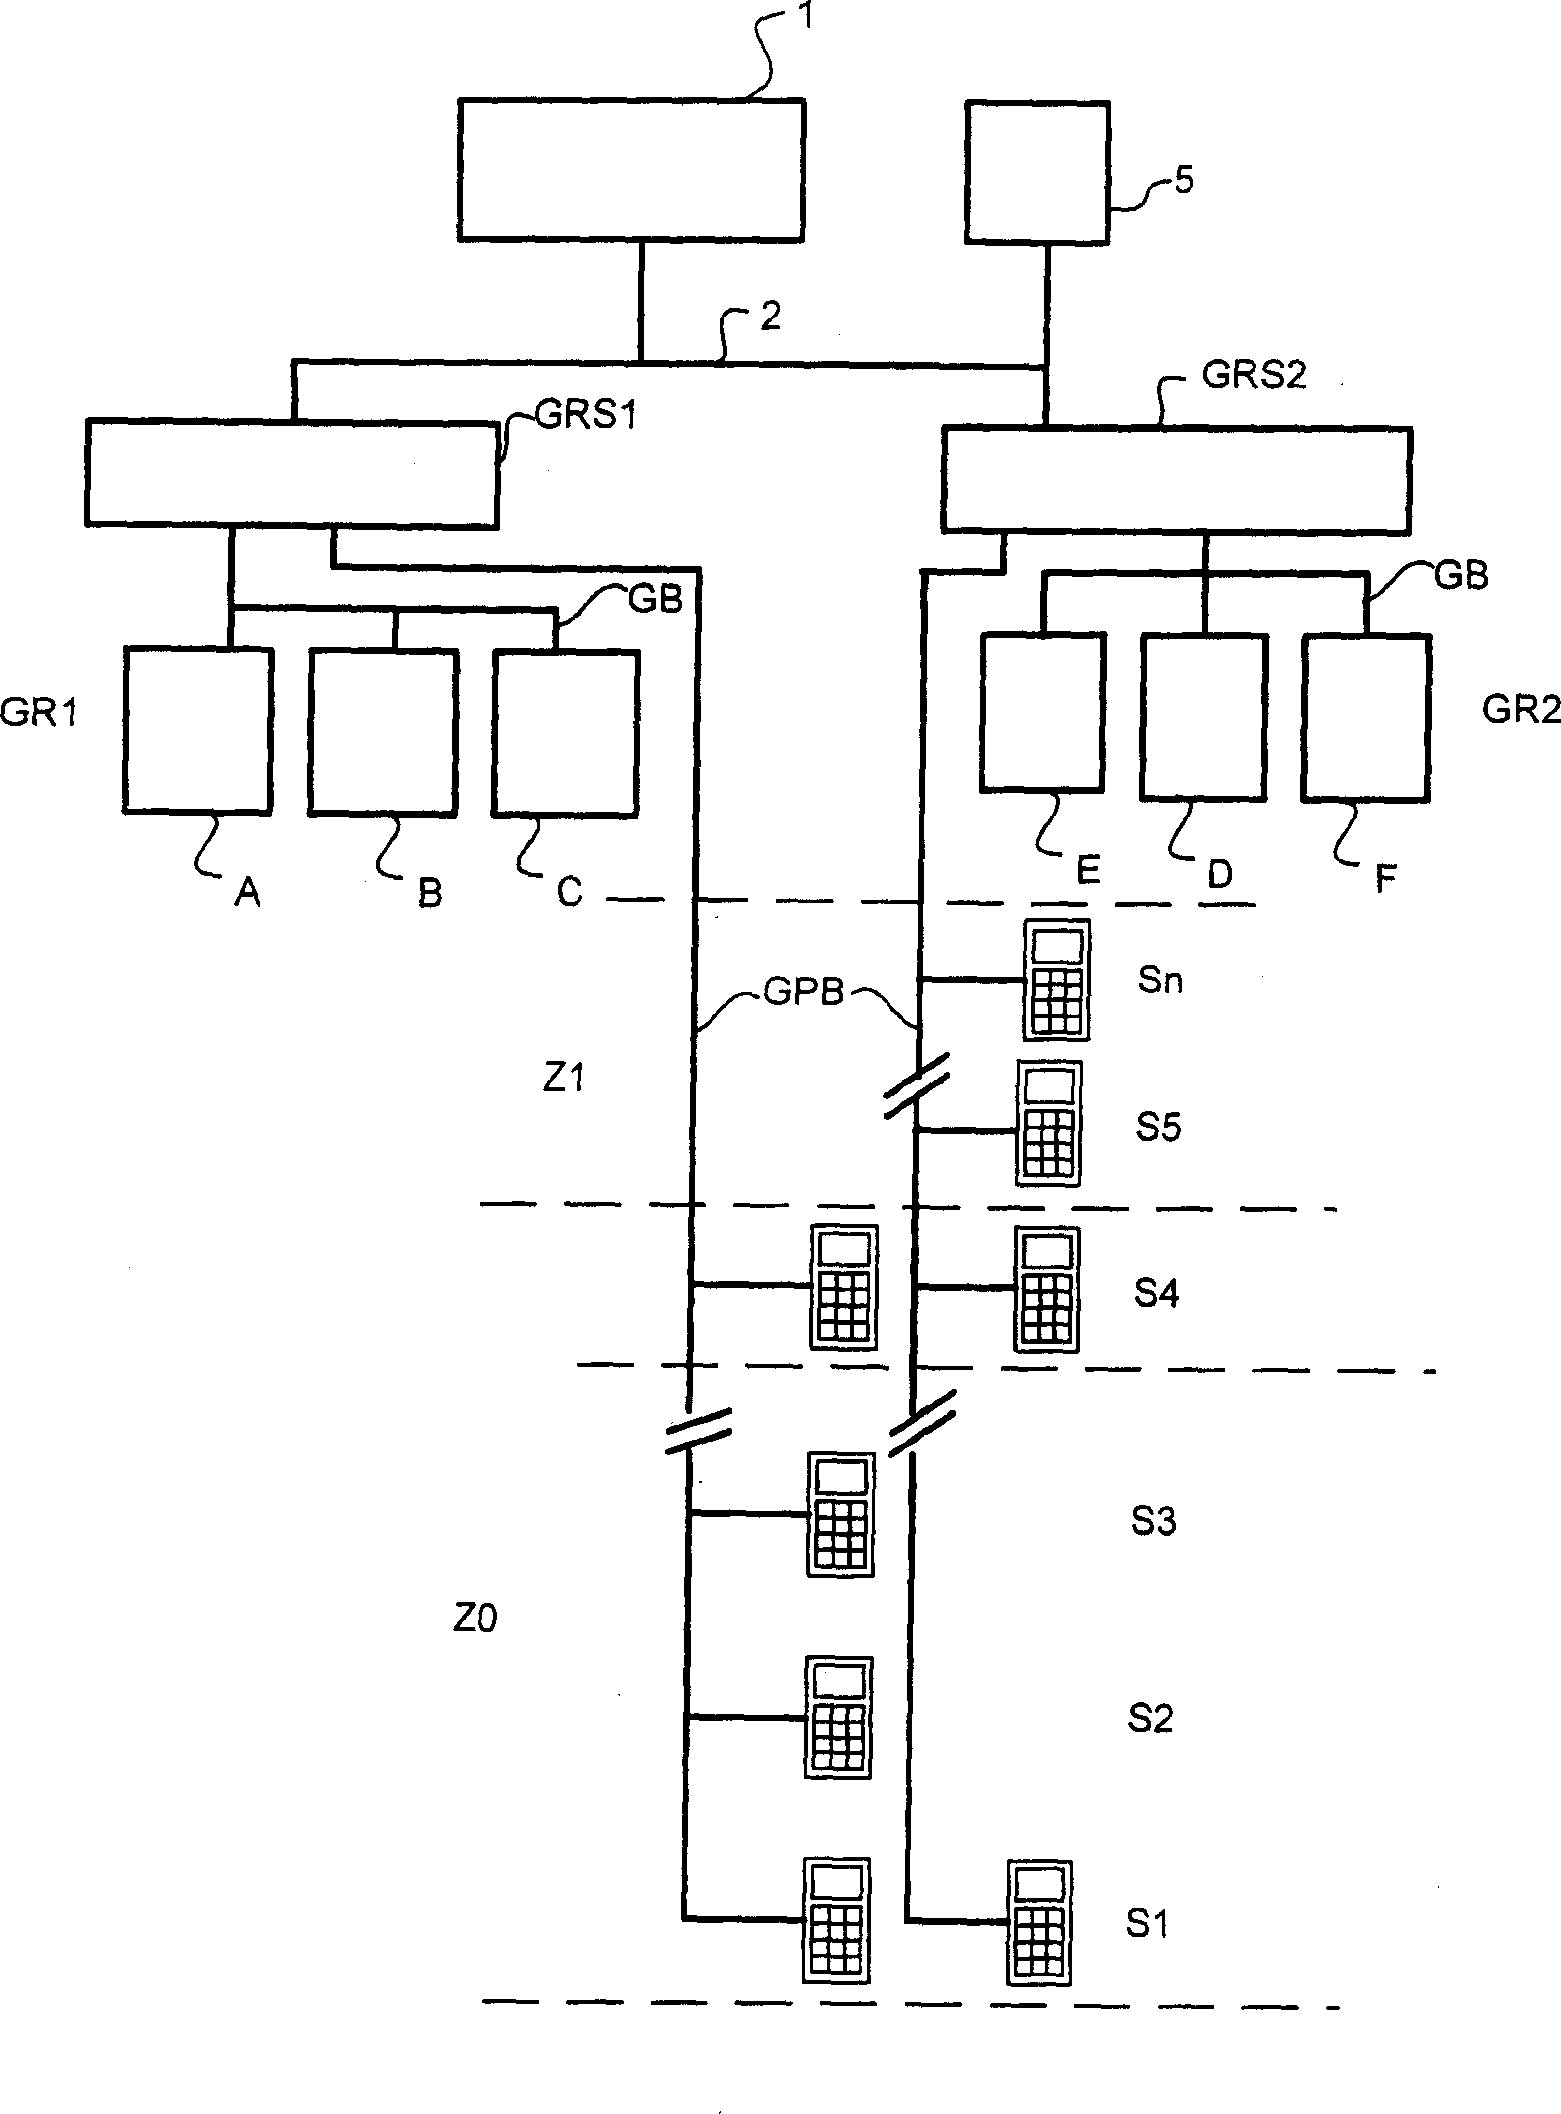 Method and apparatus for controlling zone operating of elevator equipment